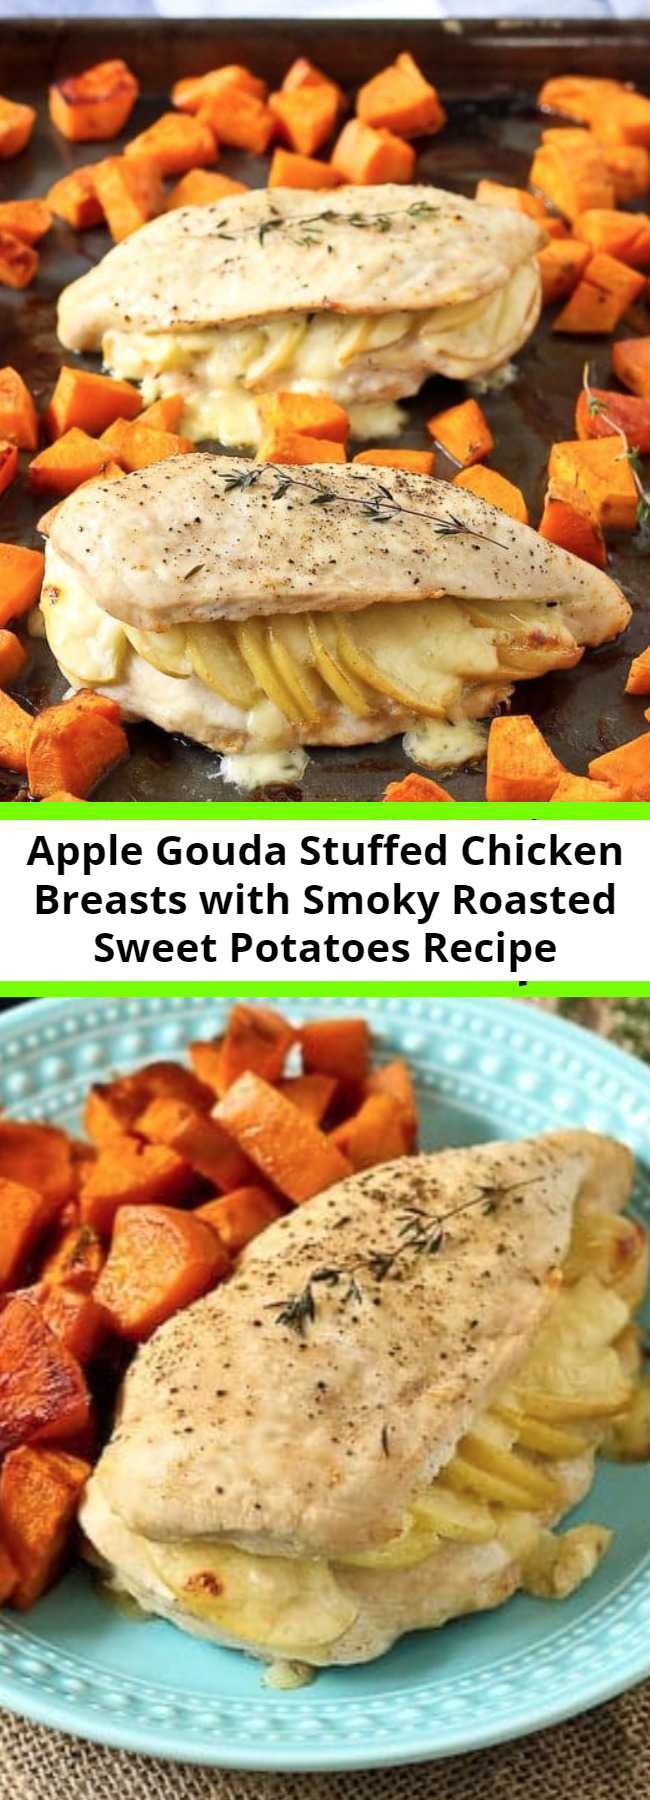 Apple Gouda Stuffed Chicken Breasts with Smoky Roasted Sweet Potatoes Recipe - Creamy Gouda cheese and sweet apples make these stuffed chicken breasts a winner! Pair with smoky roasted sweet potatoes for a sheet pan supper that will make everyone happy.